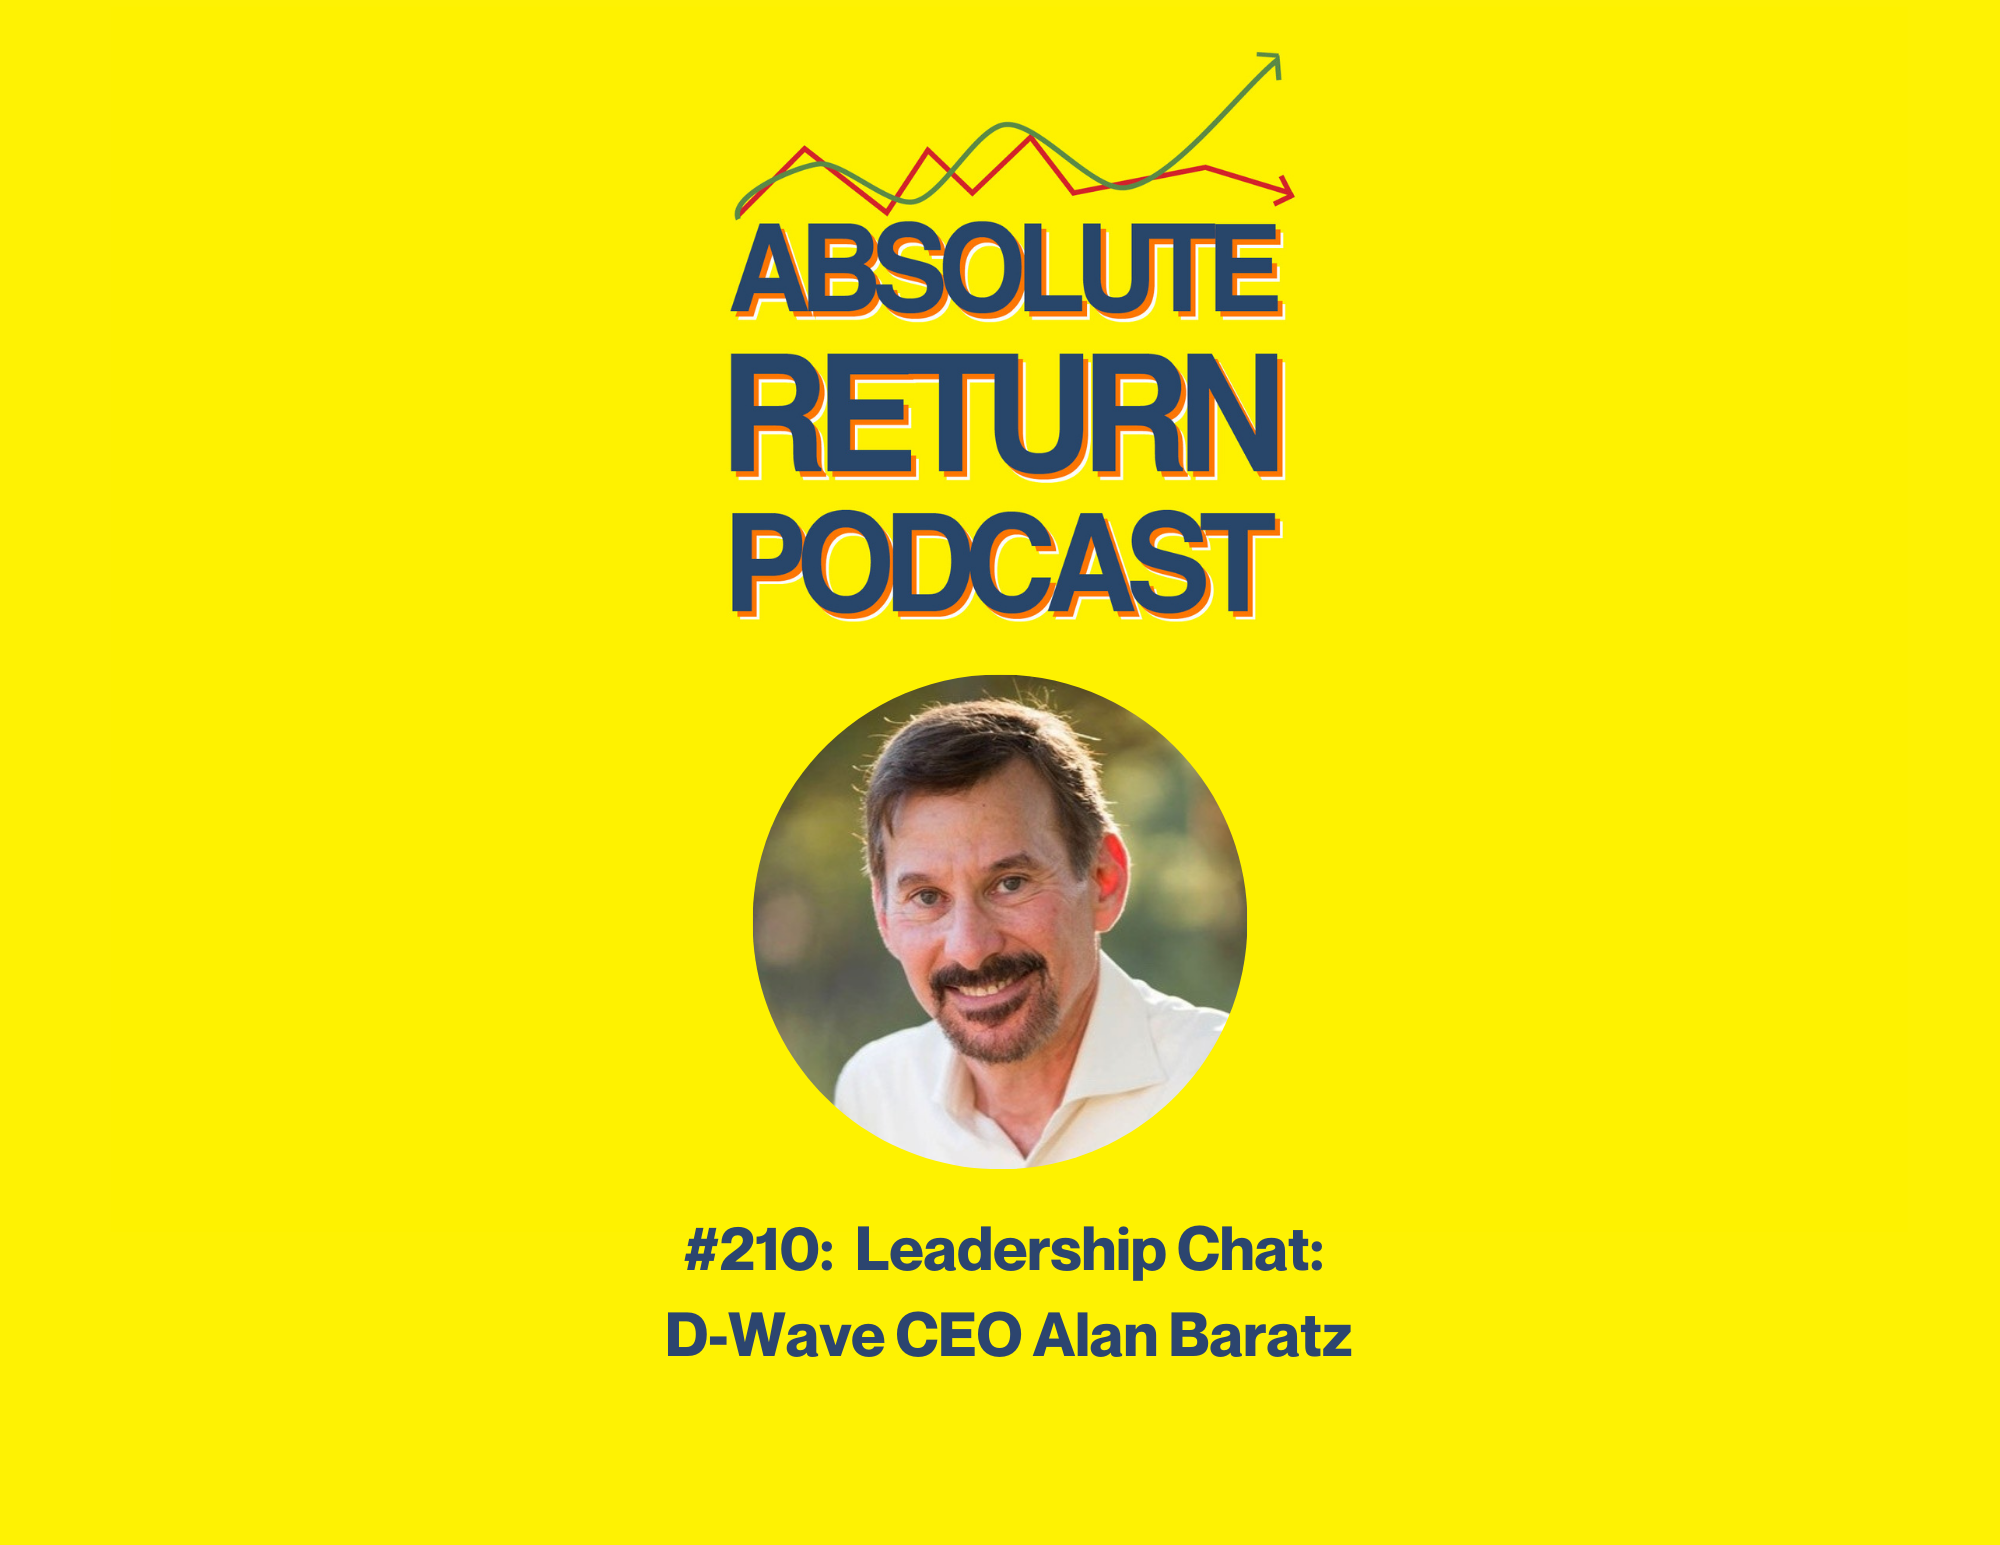 Absolute Return Podcast #210: Leadership Chat: D-Wave CEO Alan Baratz